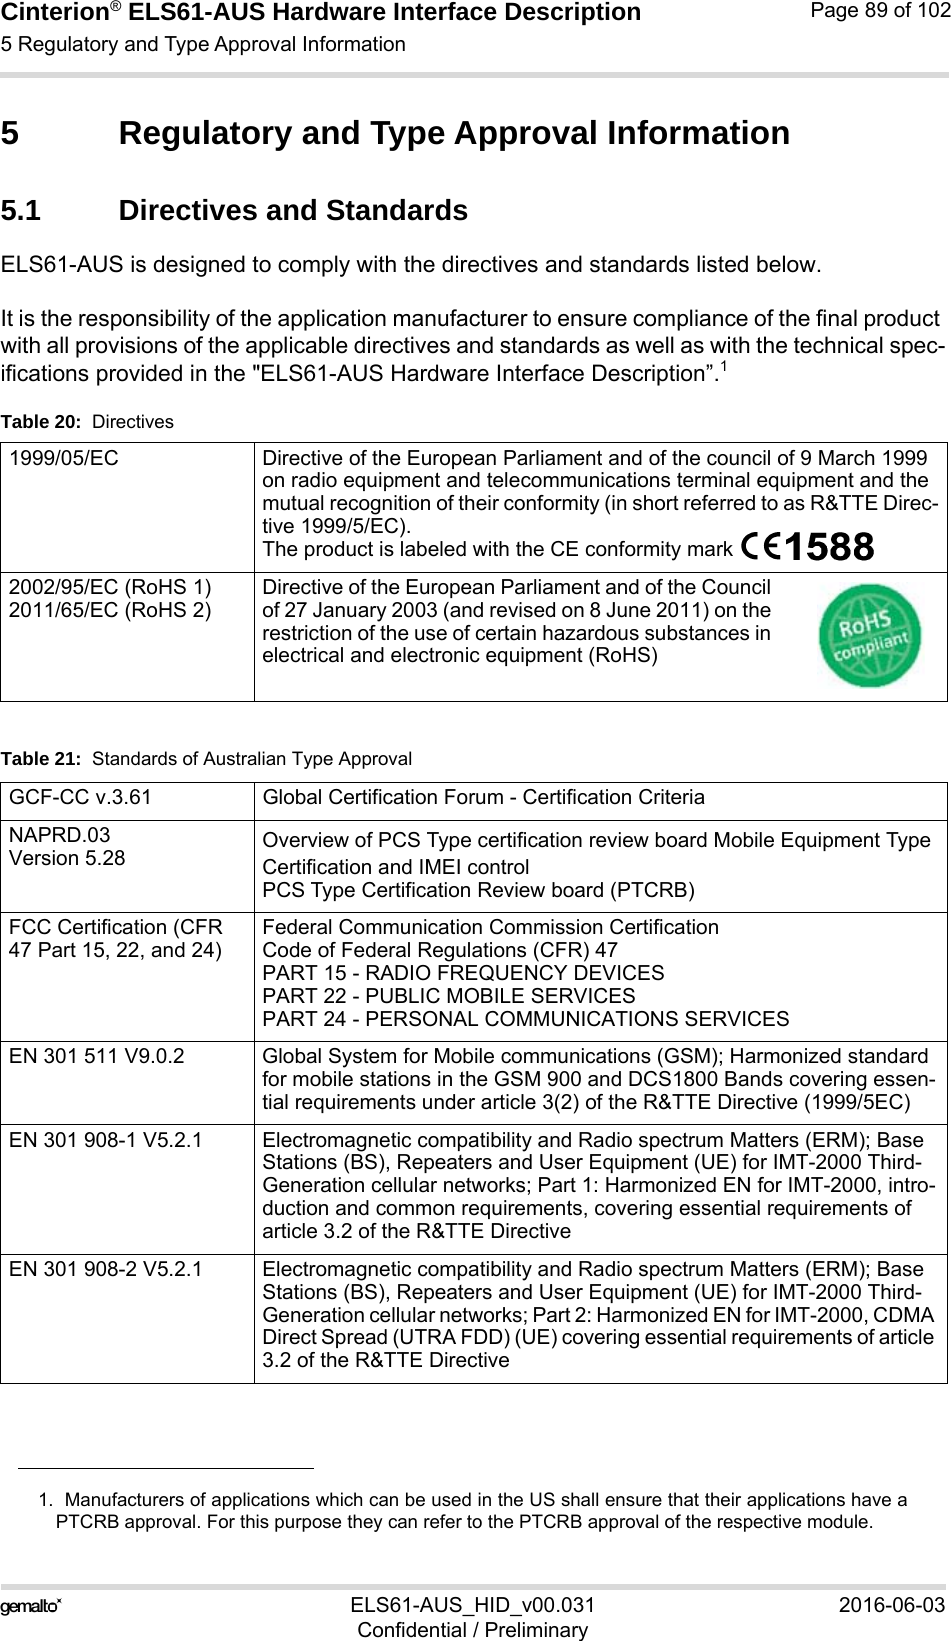 Cinterion® ELS61-AUS Hardware Interface Description5 Regulatory and Type Approval Information94ELS61-AUS_HID_v00.031 2016-06-03Confidential / PreliminaryPage 89 of 1025 Regulatory and Type Approval Information5.1 Directives and StandardsELS61-AUS is designed to comply with the directives and standards listed below.It is the responsibility of the application manufacturer to ensure compliance of the final product with all provisions of the applicable directives and standards as well as with the technical spec-ifications provided in the &quot;ELS61-AUS Hardware Interface Description”.1Table 21:  Standards of Australian Type Approval1.  Manufacturers of applications which can be used in the US shall ensure that their applications have aPTCRB approval. For this purpose they can refer to the PTCRB approval of the respective module. Table 20:  Directives1999/05/EC Directive of the European Parliament and of the council of 9 March 1999 on radio equipment and telecommunications terminal equipment and the mutual recognition of their conformity (in short referred to as R&amp;TTE Direc-tive 1999/5/EC).The product is labeled with the CE conformity mark 2002/95/EC (RoHS 1)2011/65/EC (RoHS 2)Directive of the European Parliament and of the Council of 27 January 2003 (and revised on 8 June 2011) on the restriction of the use of certain hazardous substances in electrical and electronic equipment (RoHS)GCF-CC v.3.61  Global Certification Forum - Certification CriteriaNAPRD.03 Version 5.28  Overview of PCS Type certification review board Mobile Equipment TypeCertification and IMEI controlPCS Type Certification Review board (PTCRB)FCC Certification (CFR 47 Part 15, 22, and 24) Federal Communication Commission Certification Code of Federal Regulations (CFR) 47 PART 15 - RADIO FREQUENCY DEVICESPART 22 - PUBLIC MOBILE SERVICESPART 24 - PERSONAL COMMUNICATIONS SERVICESEN 301 511 V9.0.2  Global System for Mobile communications (GSM); Harmonized standard for mobile stations in the GSM 900 and DCS1800 Bands covering essen-tial requirements under article 3(2) of the R&amp;TTE Directive (1999/5EC)EN 301 908-1 V5.2.1 Electromagnetic compatibility and Radio spectrum Matters (ERM); Base Stations (BS), Repeaters and User Equipment (UE) for IMT-2000 Third-Generation cellular networks; Part 1: Harmonized EN for IMT-2000, intro-duction and common requirements, covering essential requirements of article 3.2 of the R&amp;TTE DirectiveEN 301 908-2 V5.2.1 Electromagnetic compatibility and Radio spectrum Matters (ERM); Base Stations (BS), Repeaters and User Equipment (UE) for IMT-2000 Third-Generation cellular networks; Part 2: Harmonized EN for IMT-2000, CDMA Direct Spread (UTRA FDD) (UE) covering essential requirements of article 3.2 of the R&amp;TTE Directive